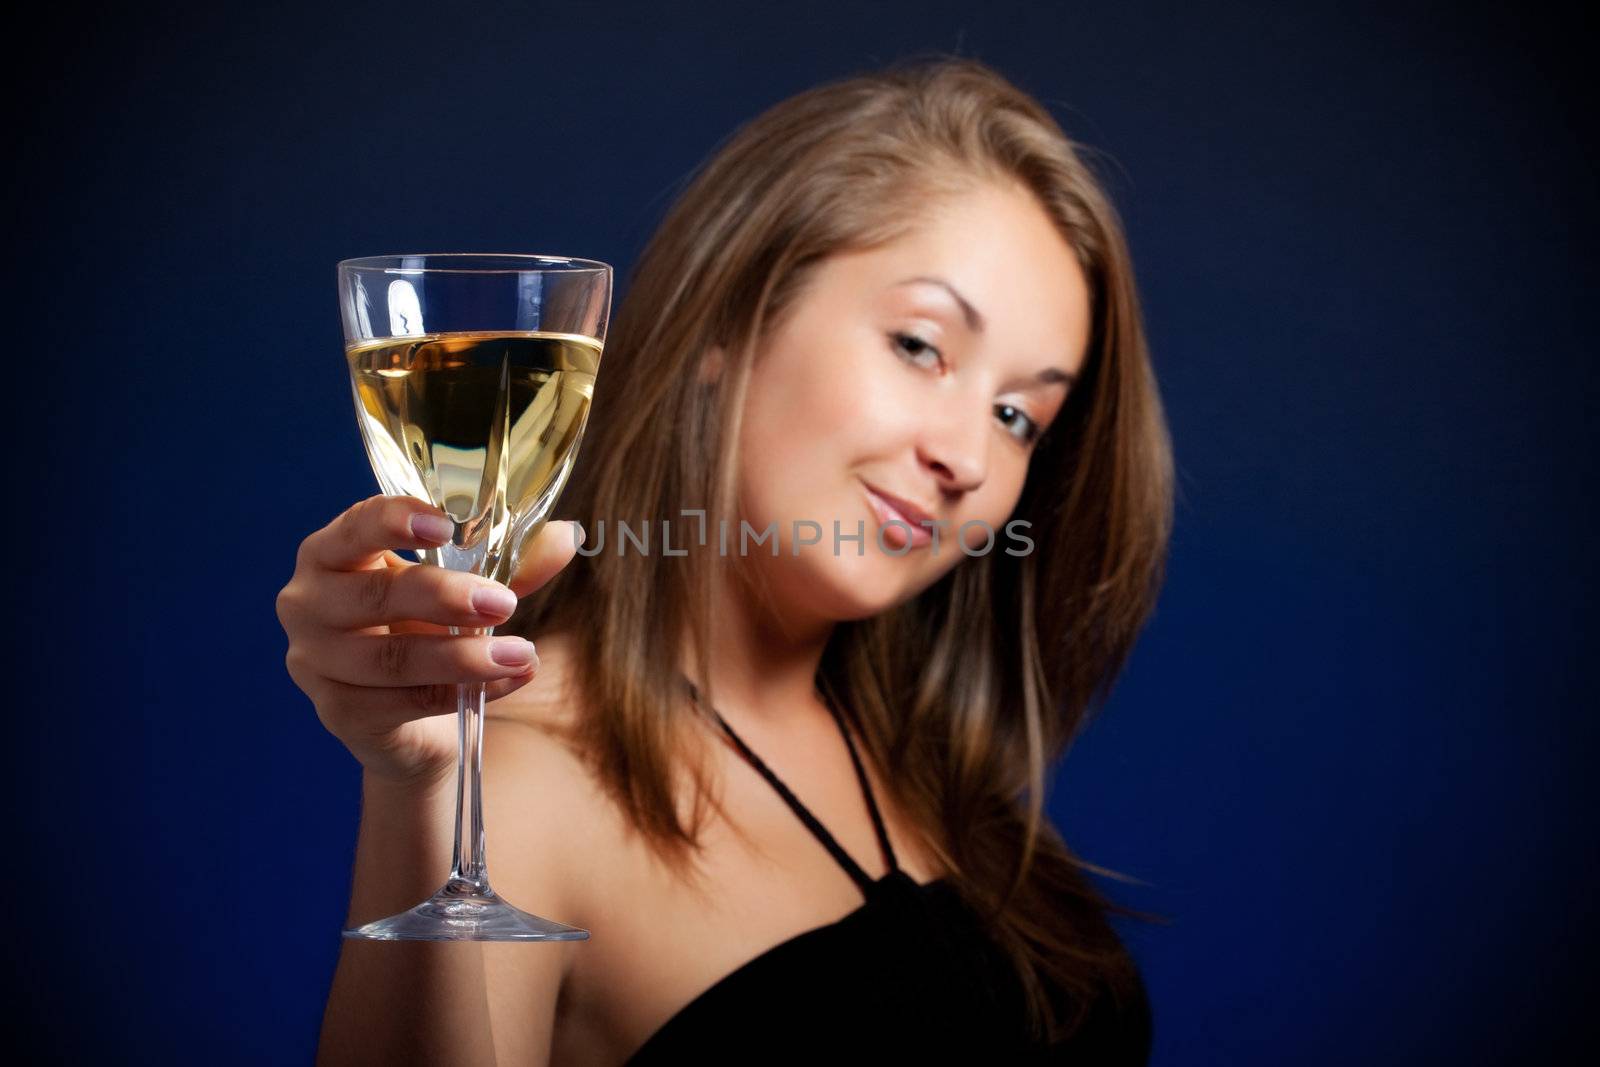 beautiful girl with glass of wine by petr_malyshev